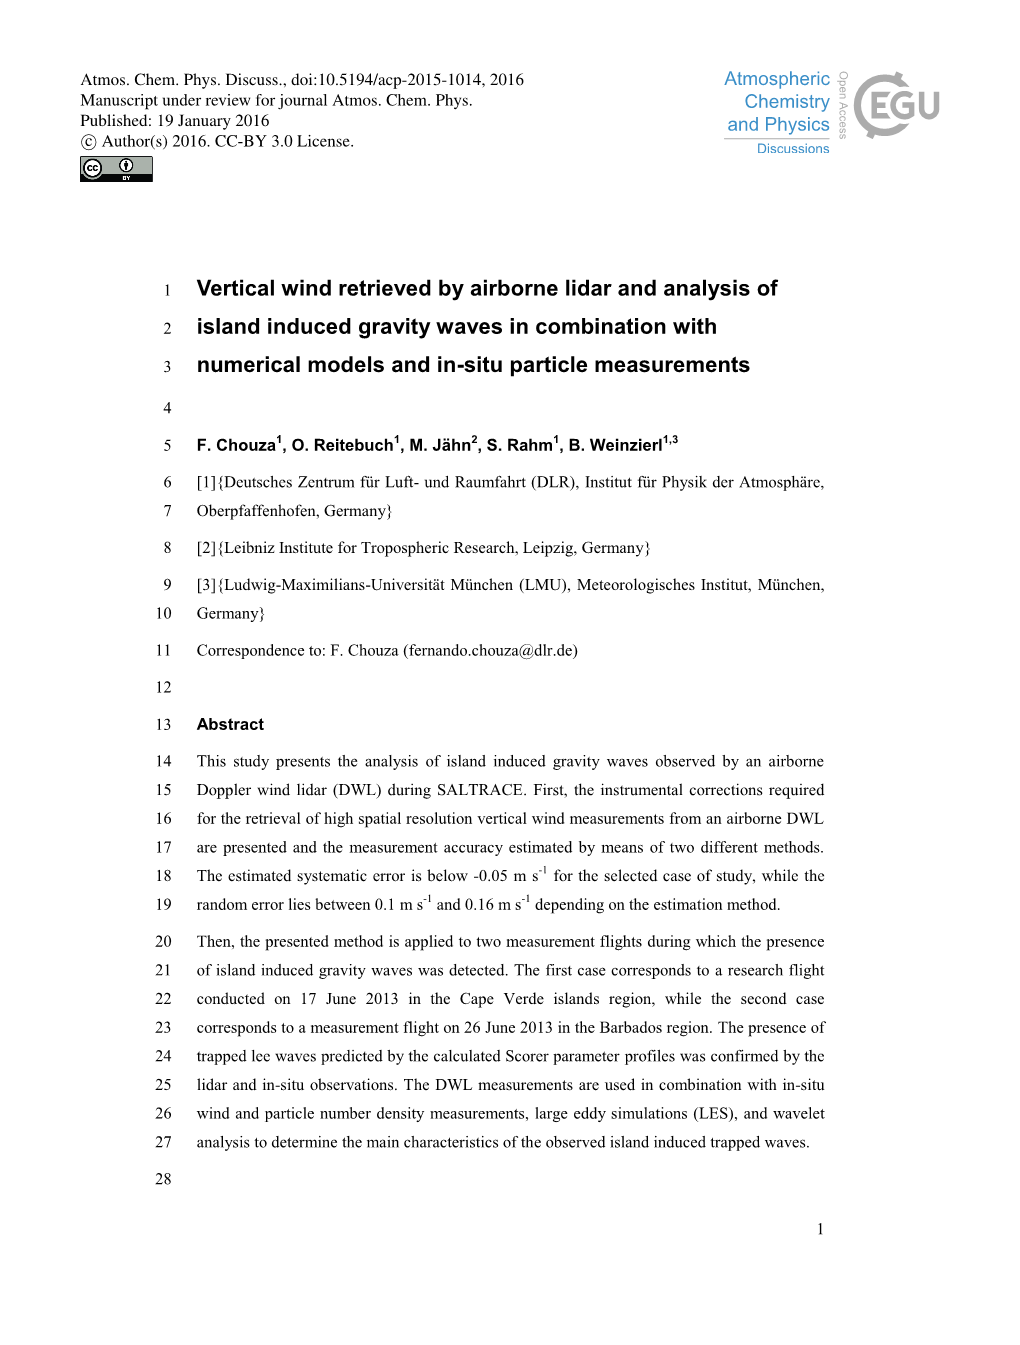 Vertical Wind Retrieved by Airborne Lidar and Analysis Of